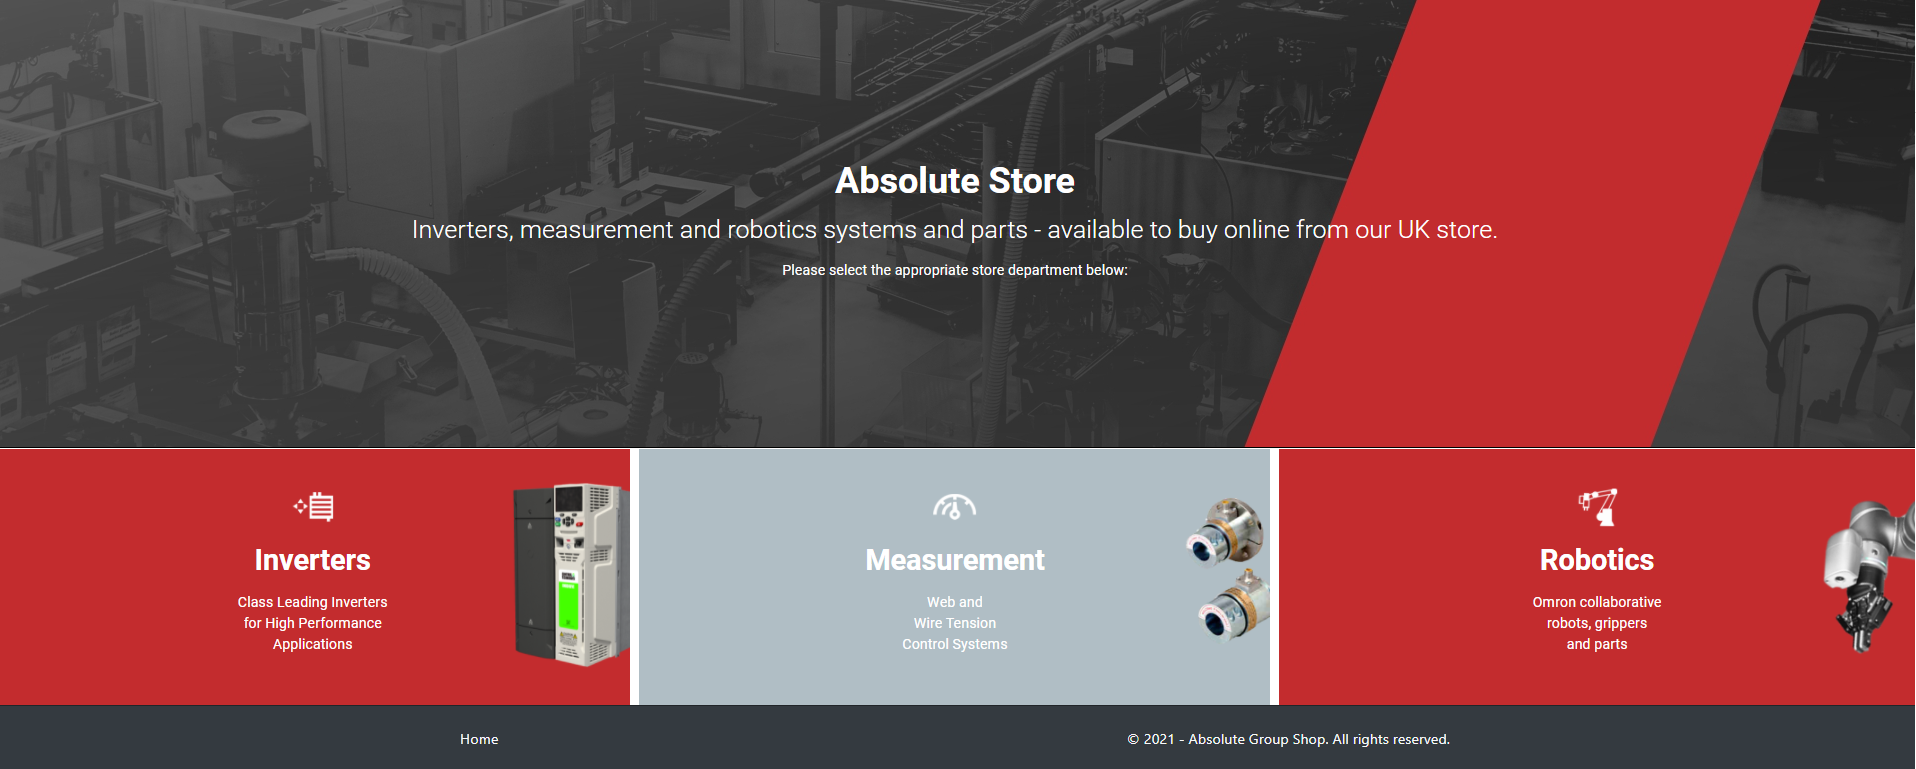 absolute-store-home-page